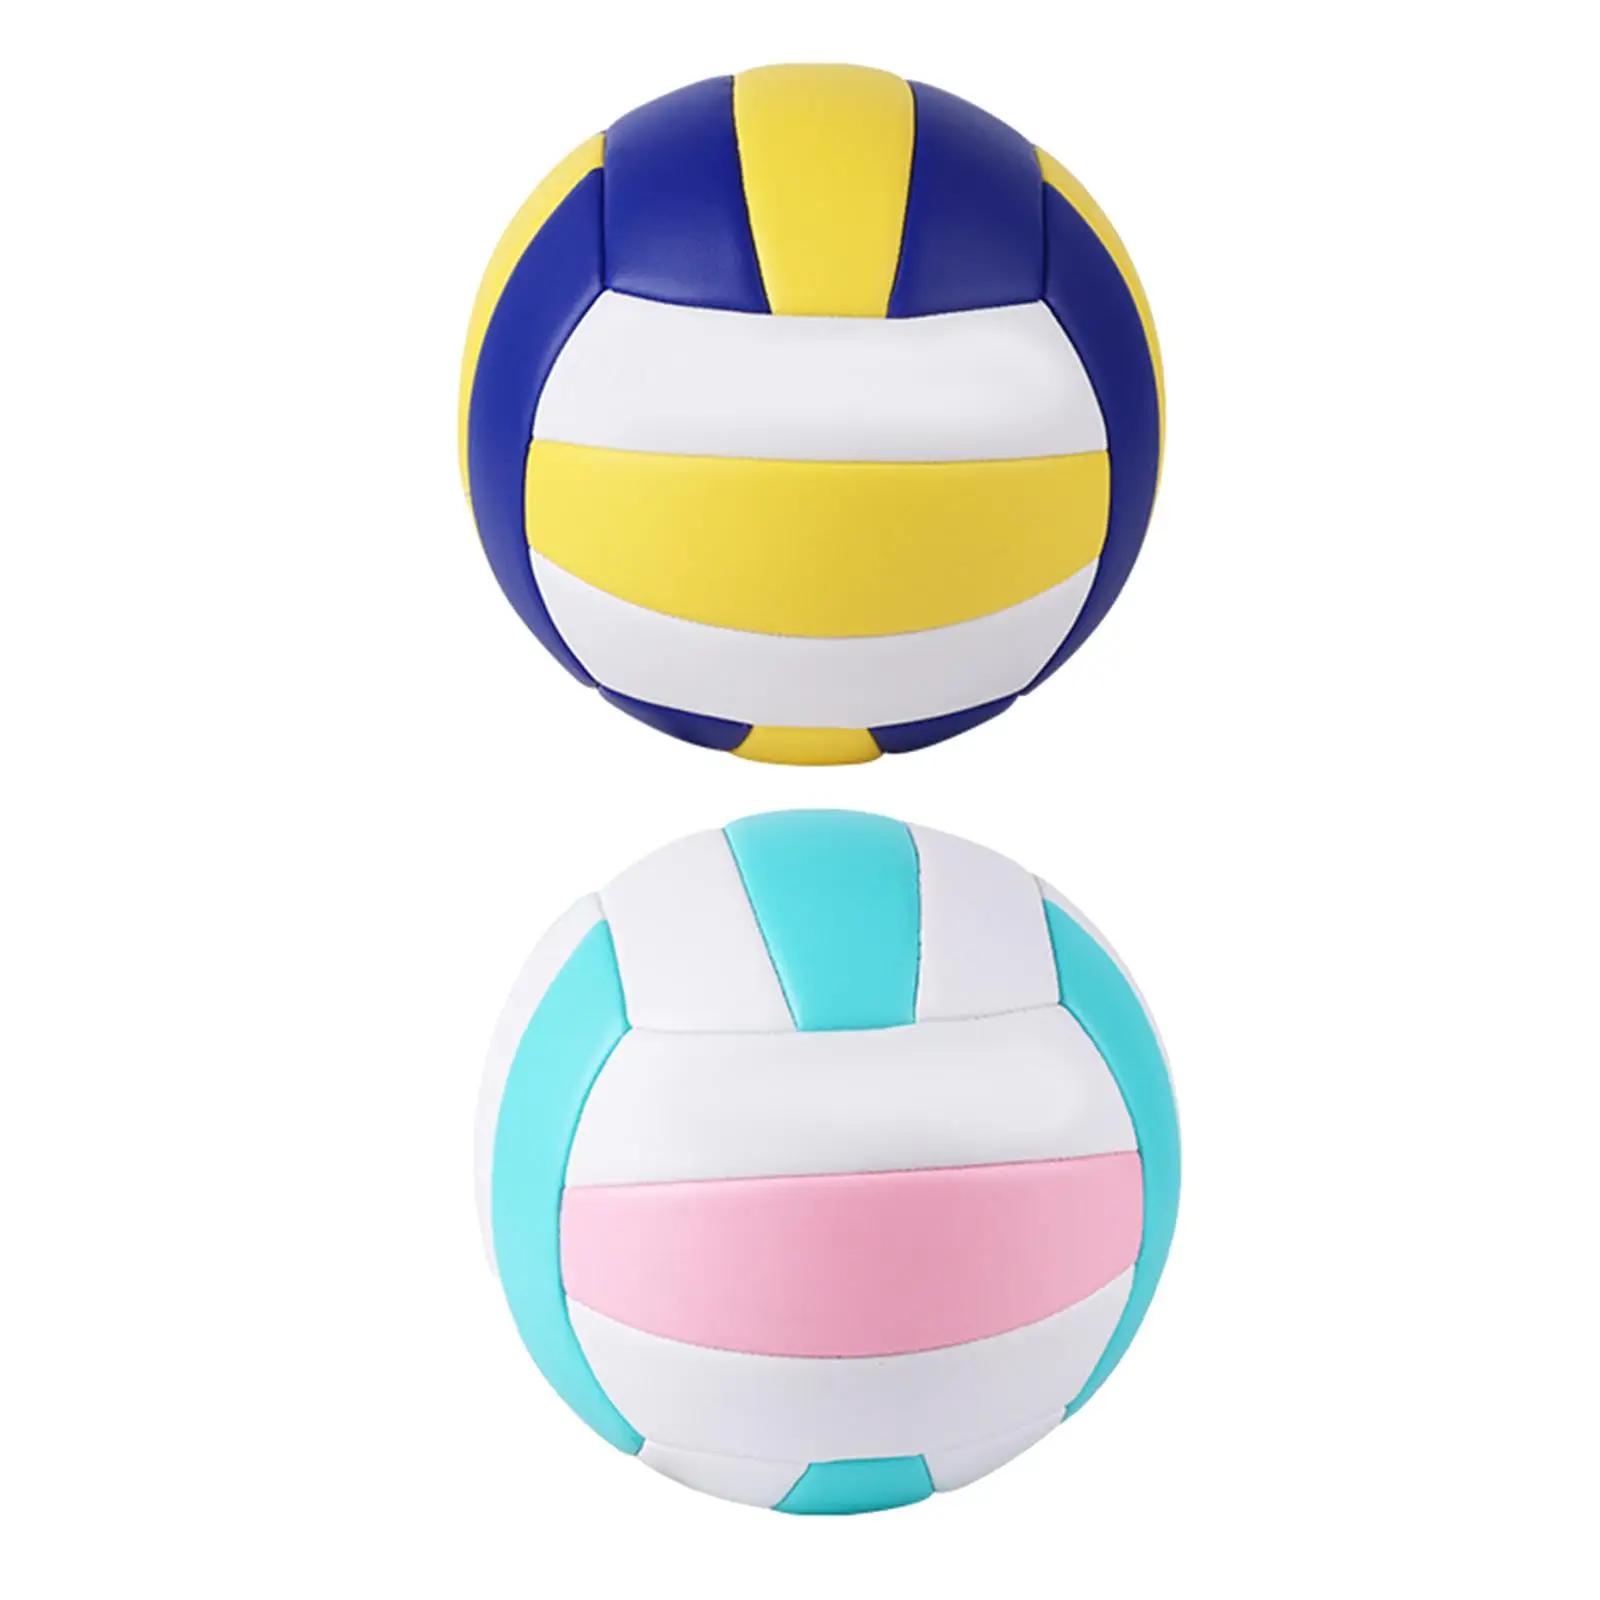 Indoor Volleyball PU Leather Ball w/ Inflator Game Match Training Teenager